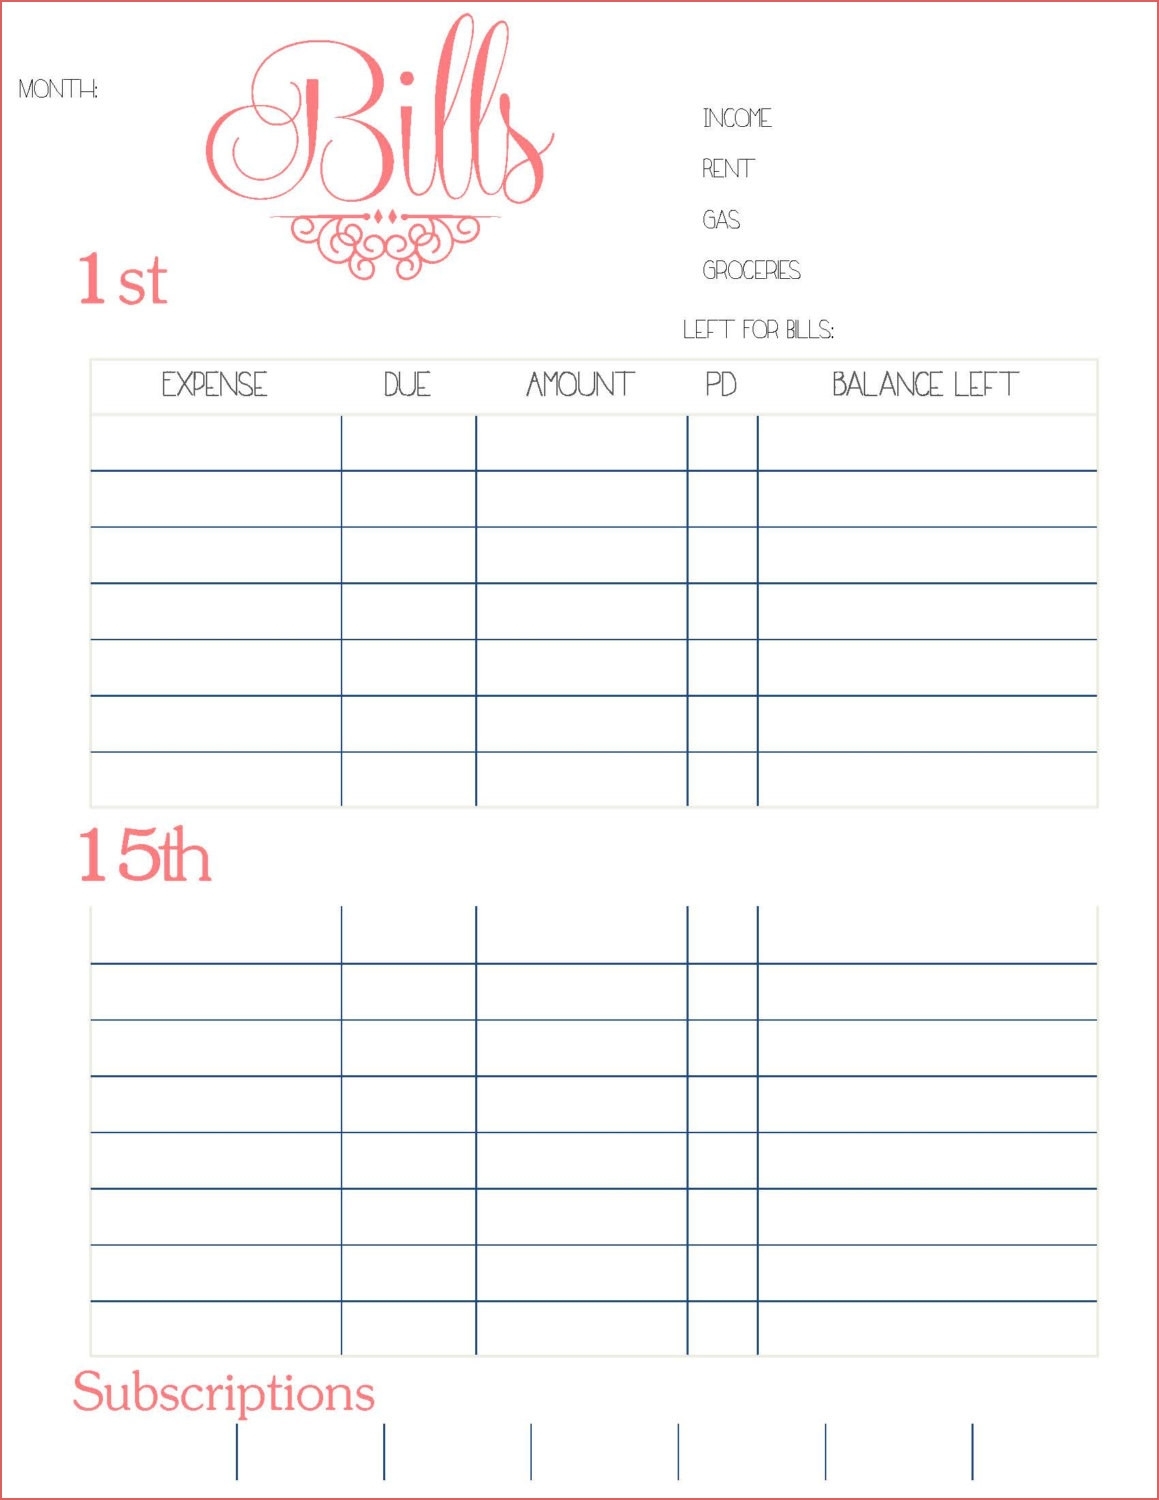 Bill Calendar Printable Free Printable Budget Calendar Template 2016 intended for Monthly Bill Calendar Template Printable